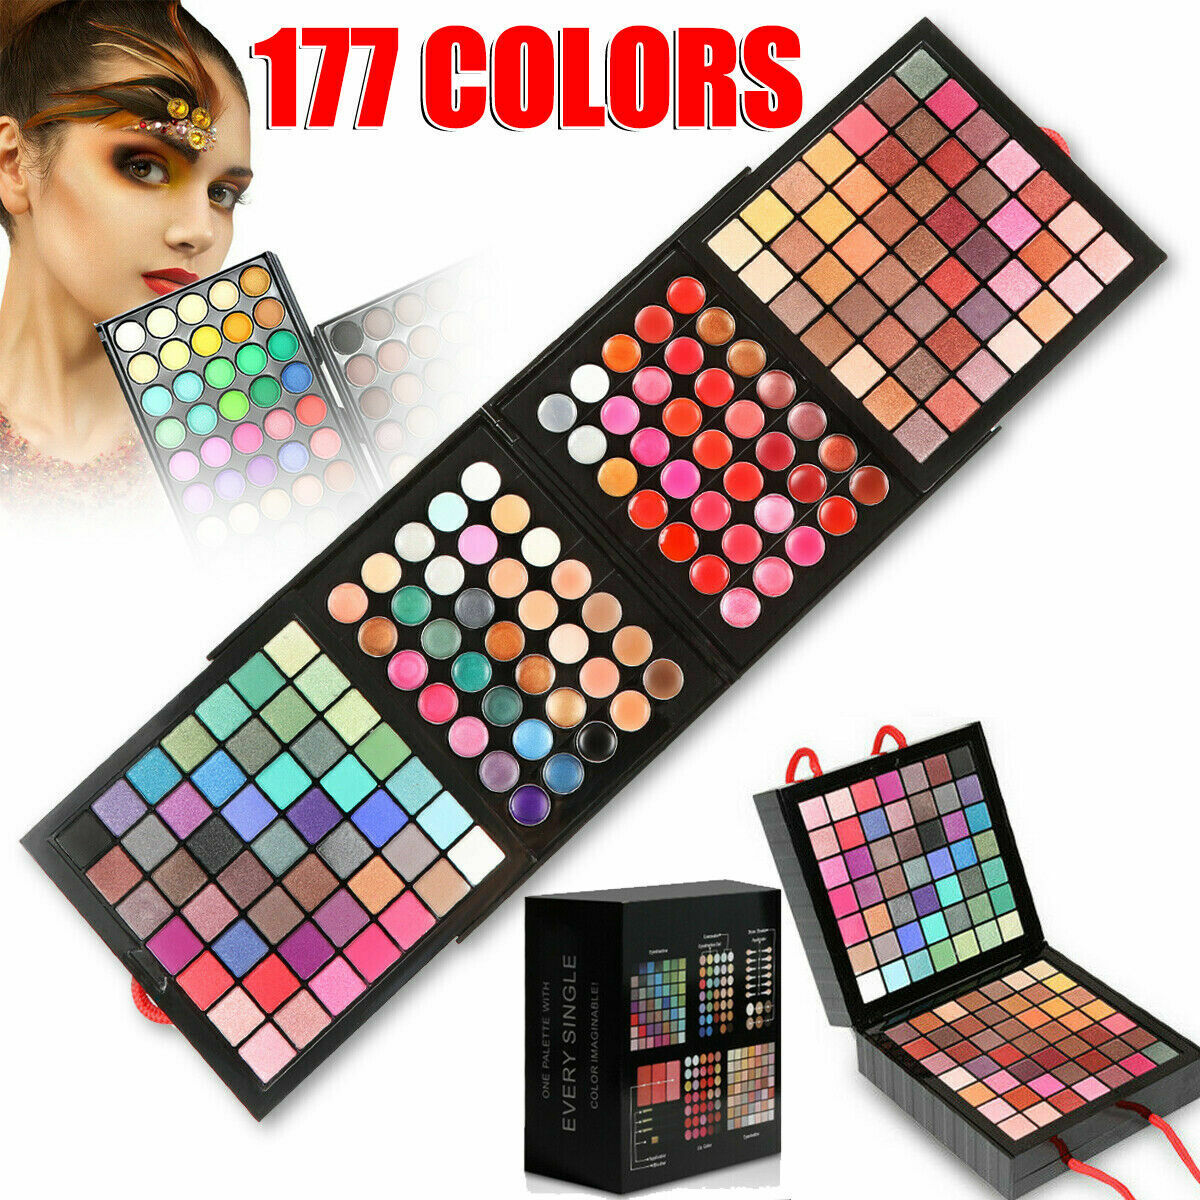 Unleash Your Inner Beauty with 177-Color Makeup Kit: Cosmetic Set for Girls Featuring Eyeshadow Palette, Lipsticks, and Stylish Beauty Case